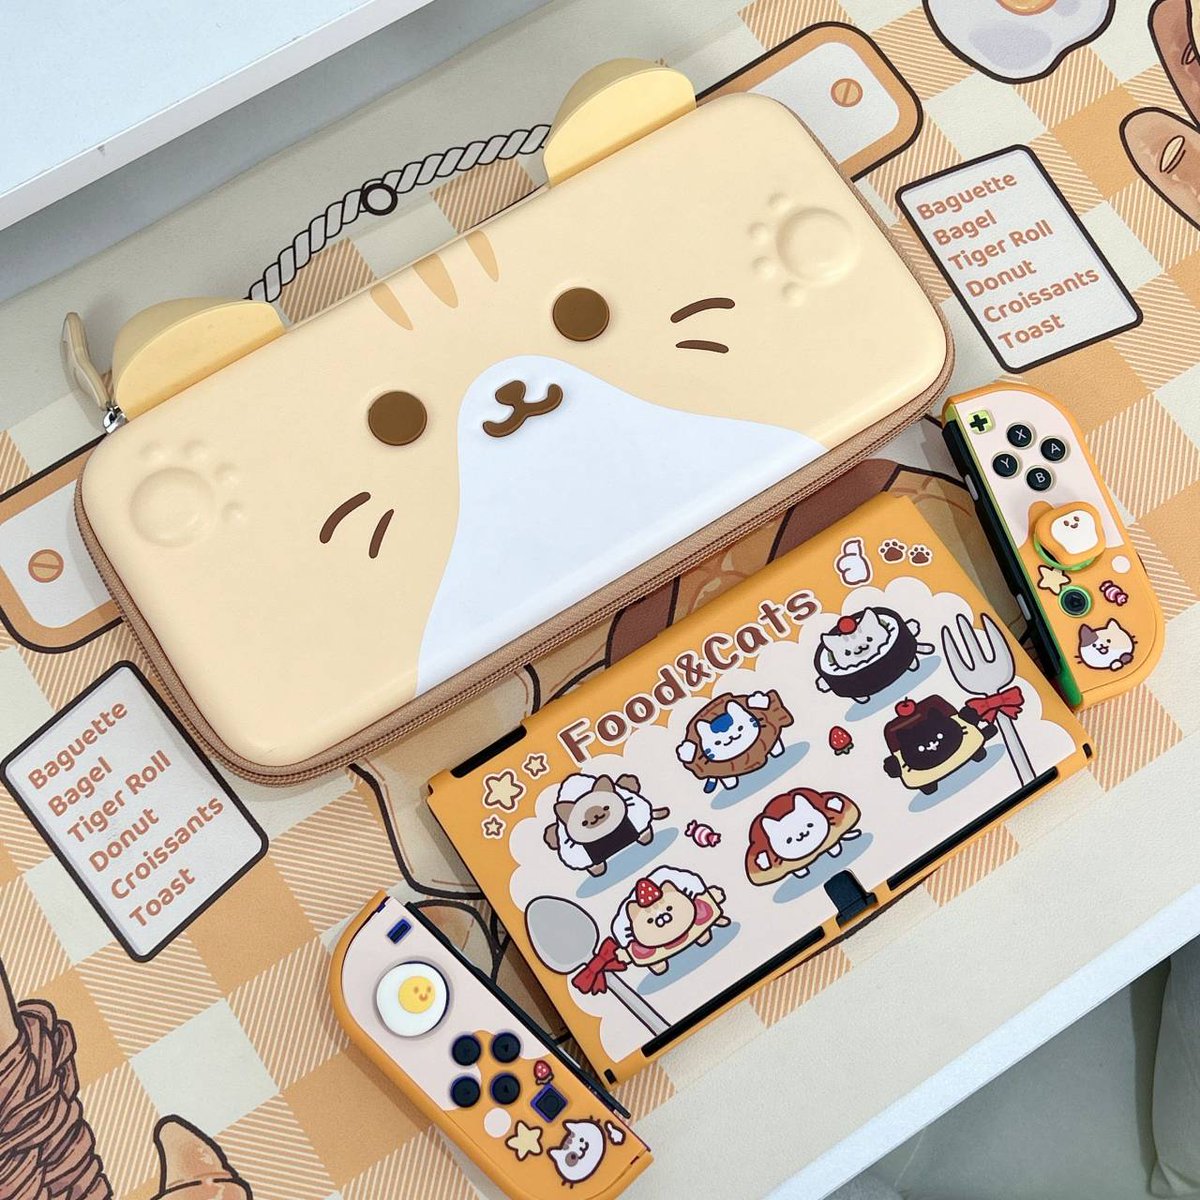 New additions to the Cat Restaurant!🍞🍳🥖#comingsoon2023

These two items are available now
>Cat Ears Carrying Case
bit.ly/3odaAZG
>Bakery Cat Mouse Pad
bit.ly/433XWuM

#Nintendo #NintendoSwitch #switchaccessories #nintendoswitchgames #catlover #tloz